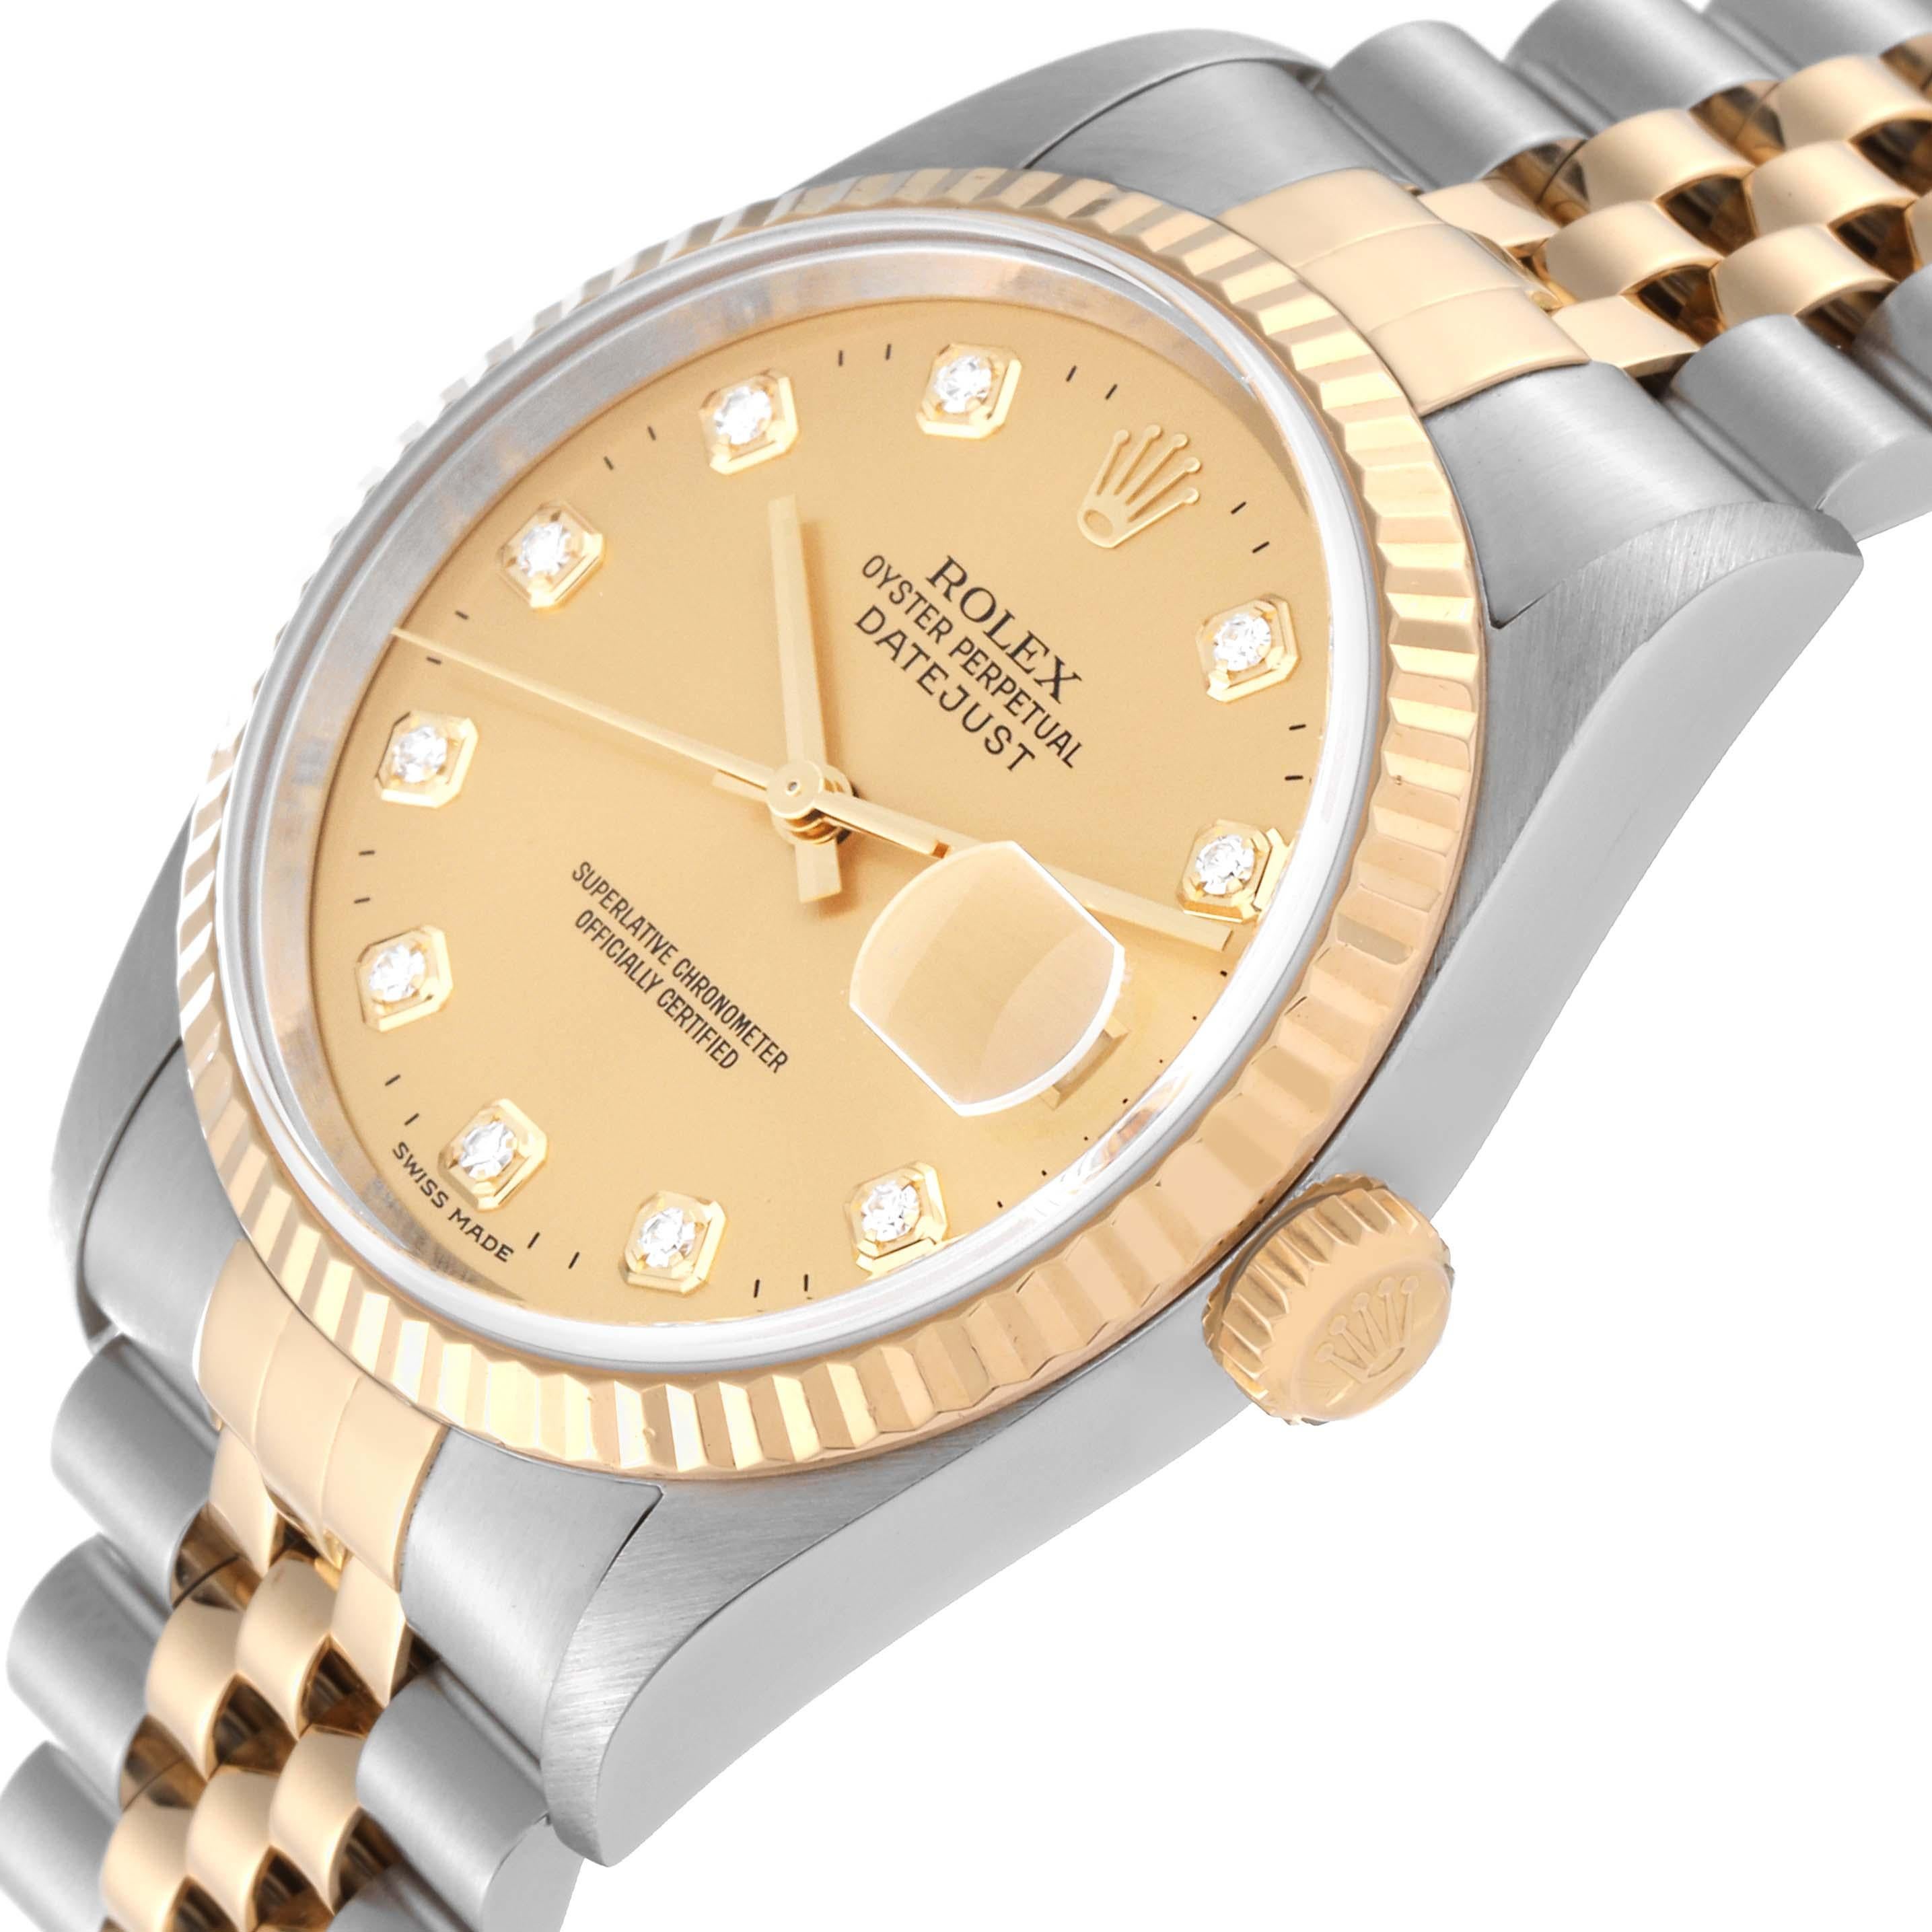 Rolex Datejust Champagne Diamond Dial Steel Yellow Gold Mens Watch 16233 2